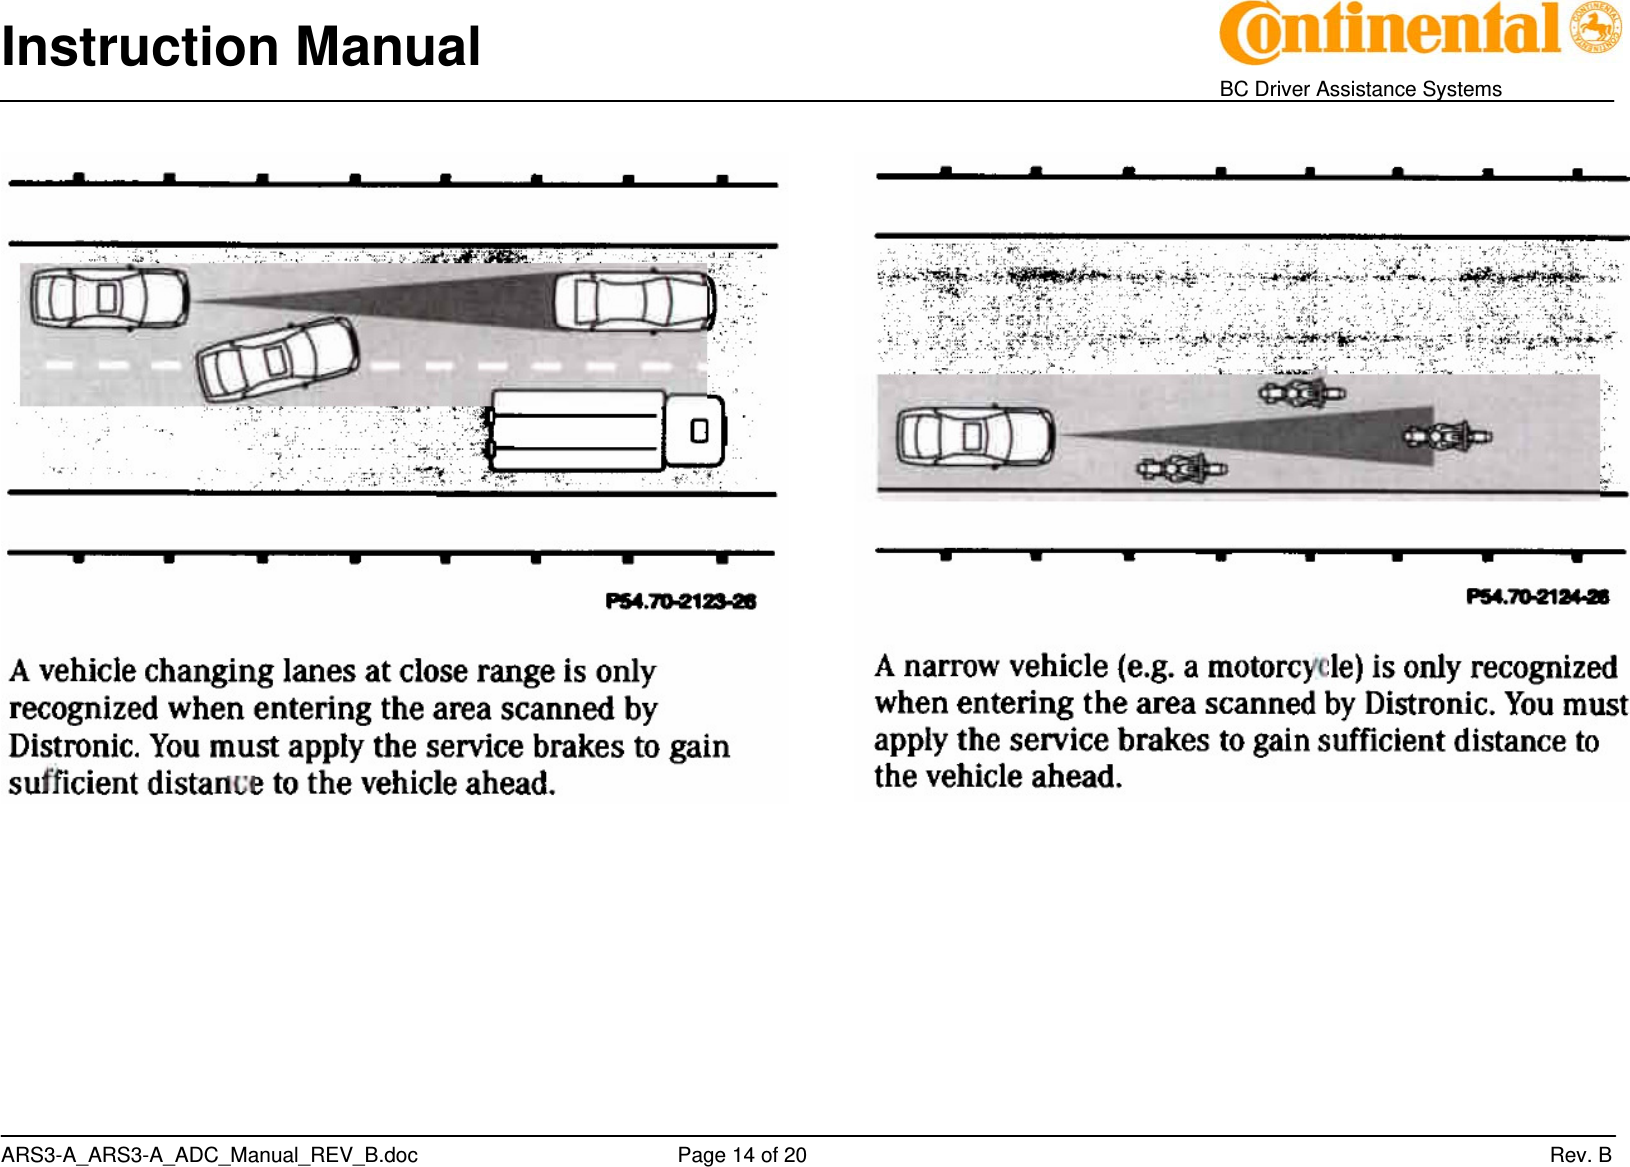 Instruction Manual    BC Driver Assistance Systems ARS3-A_ARS3-A_ADC_Manual_REV_B.doc     Page 14 of 20                 Rev. B   